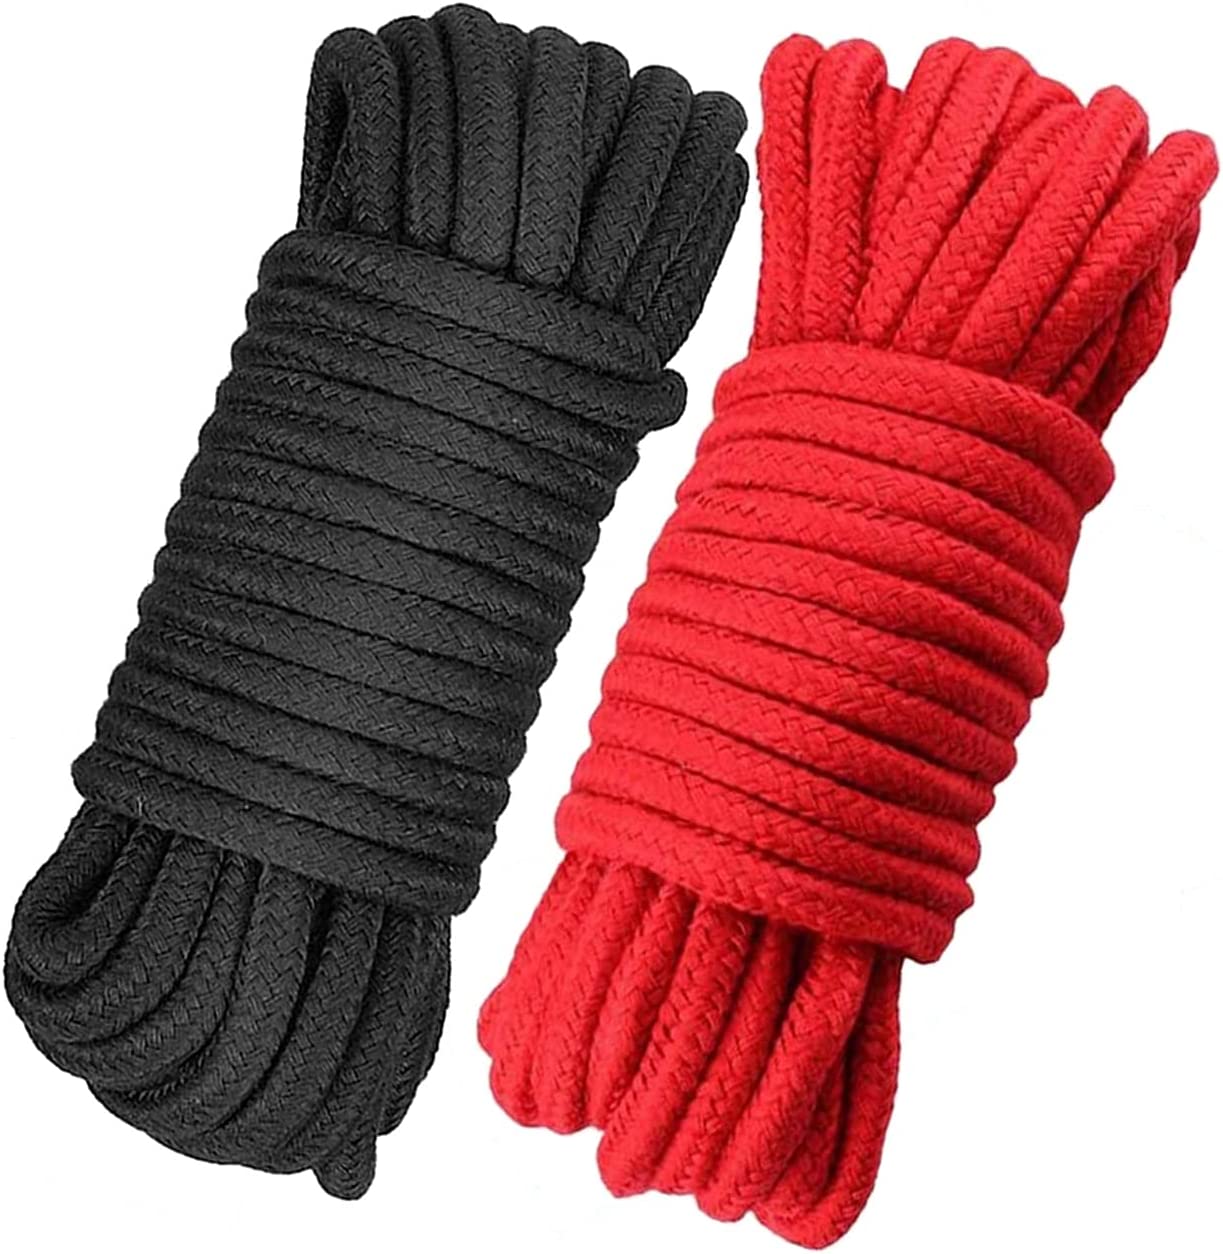 NOGIS Soft Cotton Rope, 32 feet / 10m Rope, 8mm Thick, Soft Rope, Long  Rope, Soft Tying Rope (Black+Red), 2Pcs